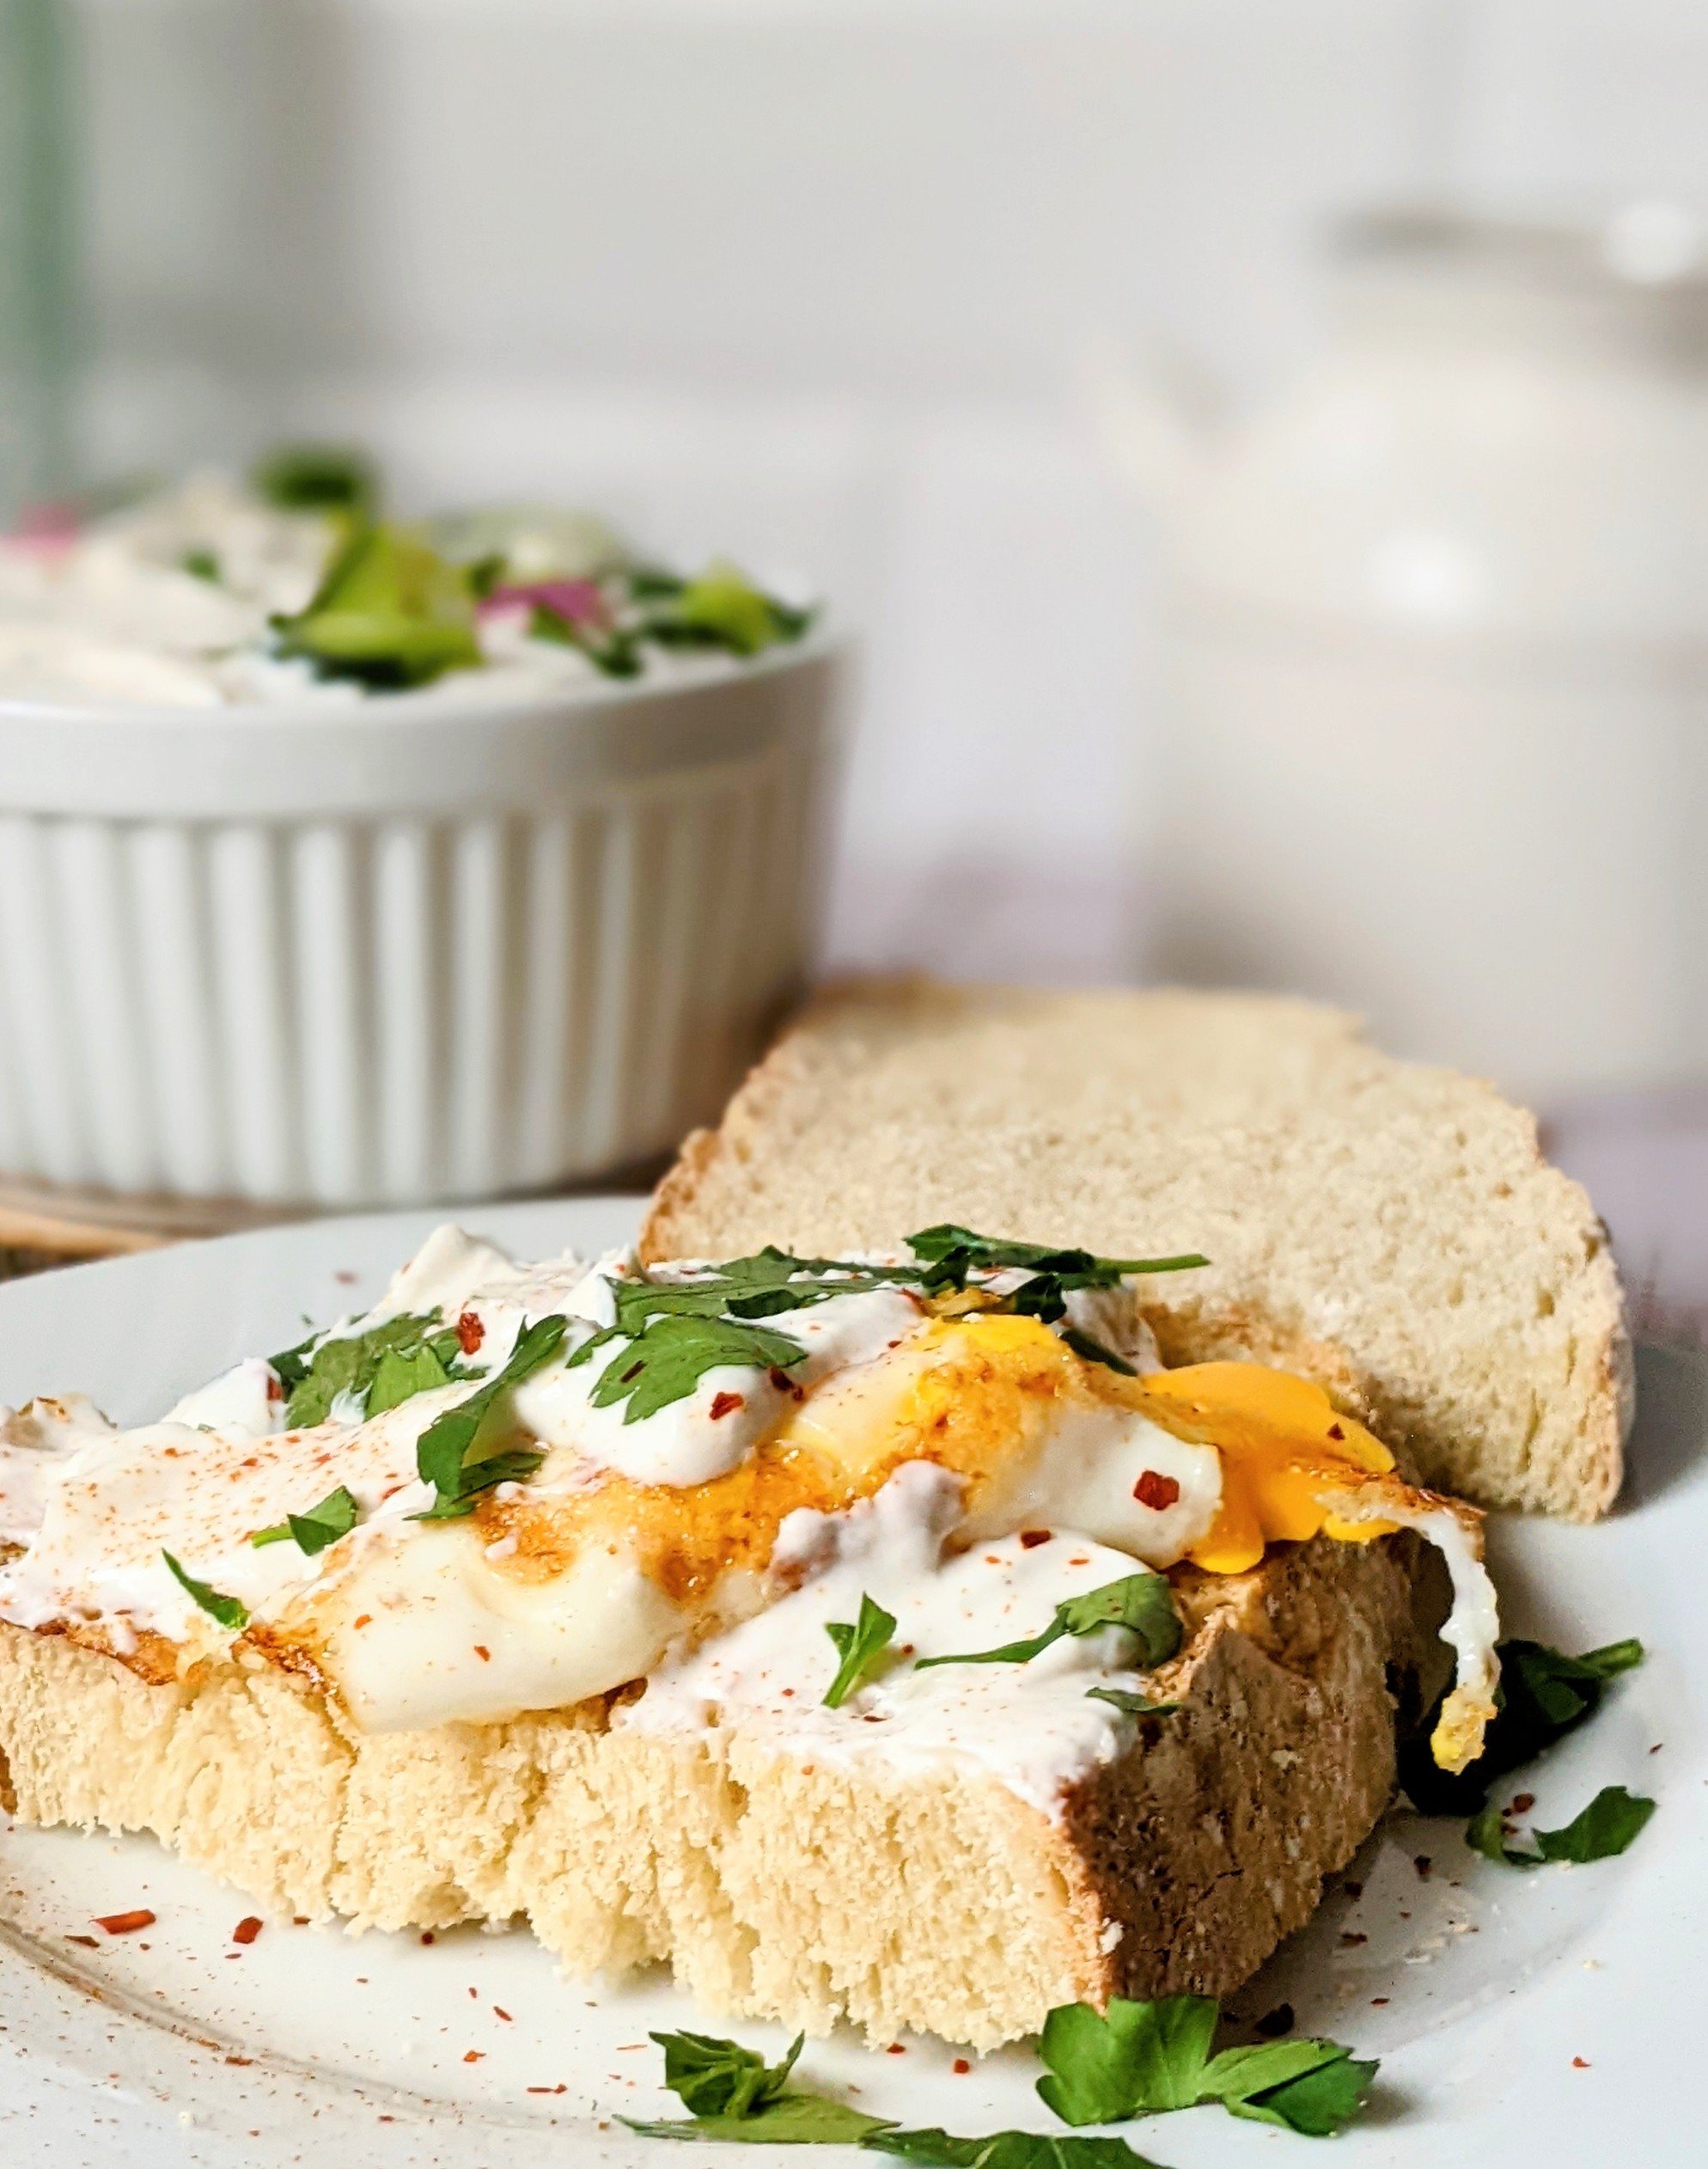 tzatziki egg sandwich recipes with tzatziki leftover ideas what to do with leftover yogurt or cucumbers for breakfast brunch vegetarian sandwiches